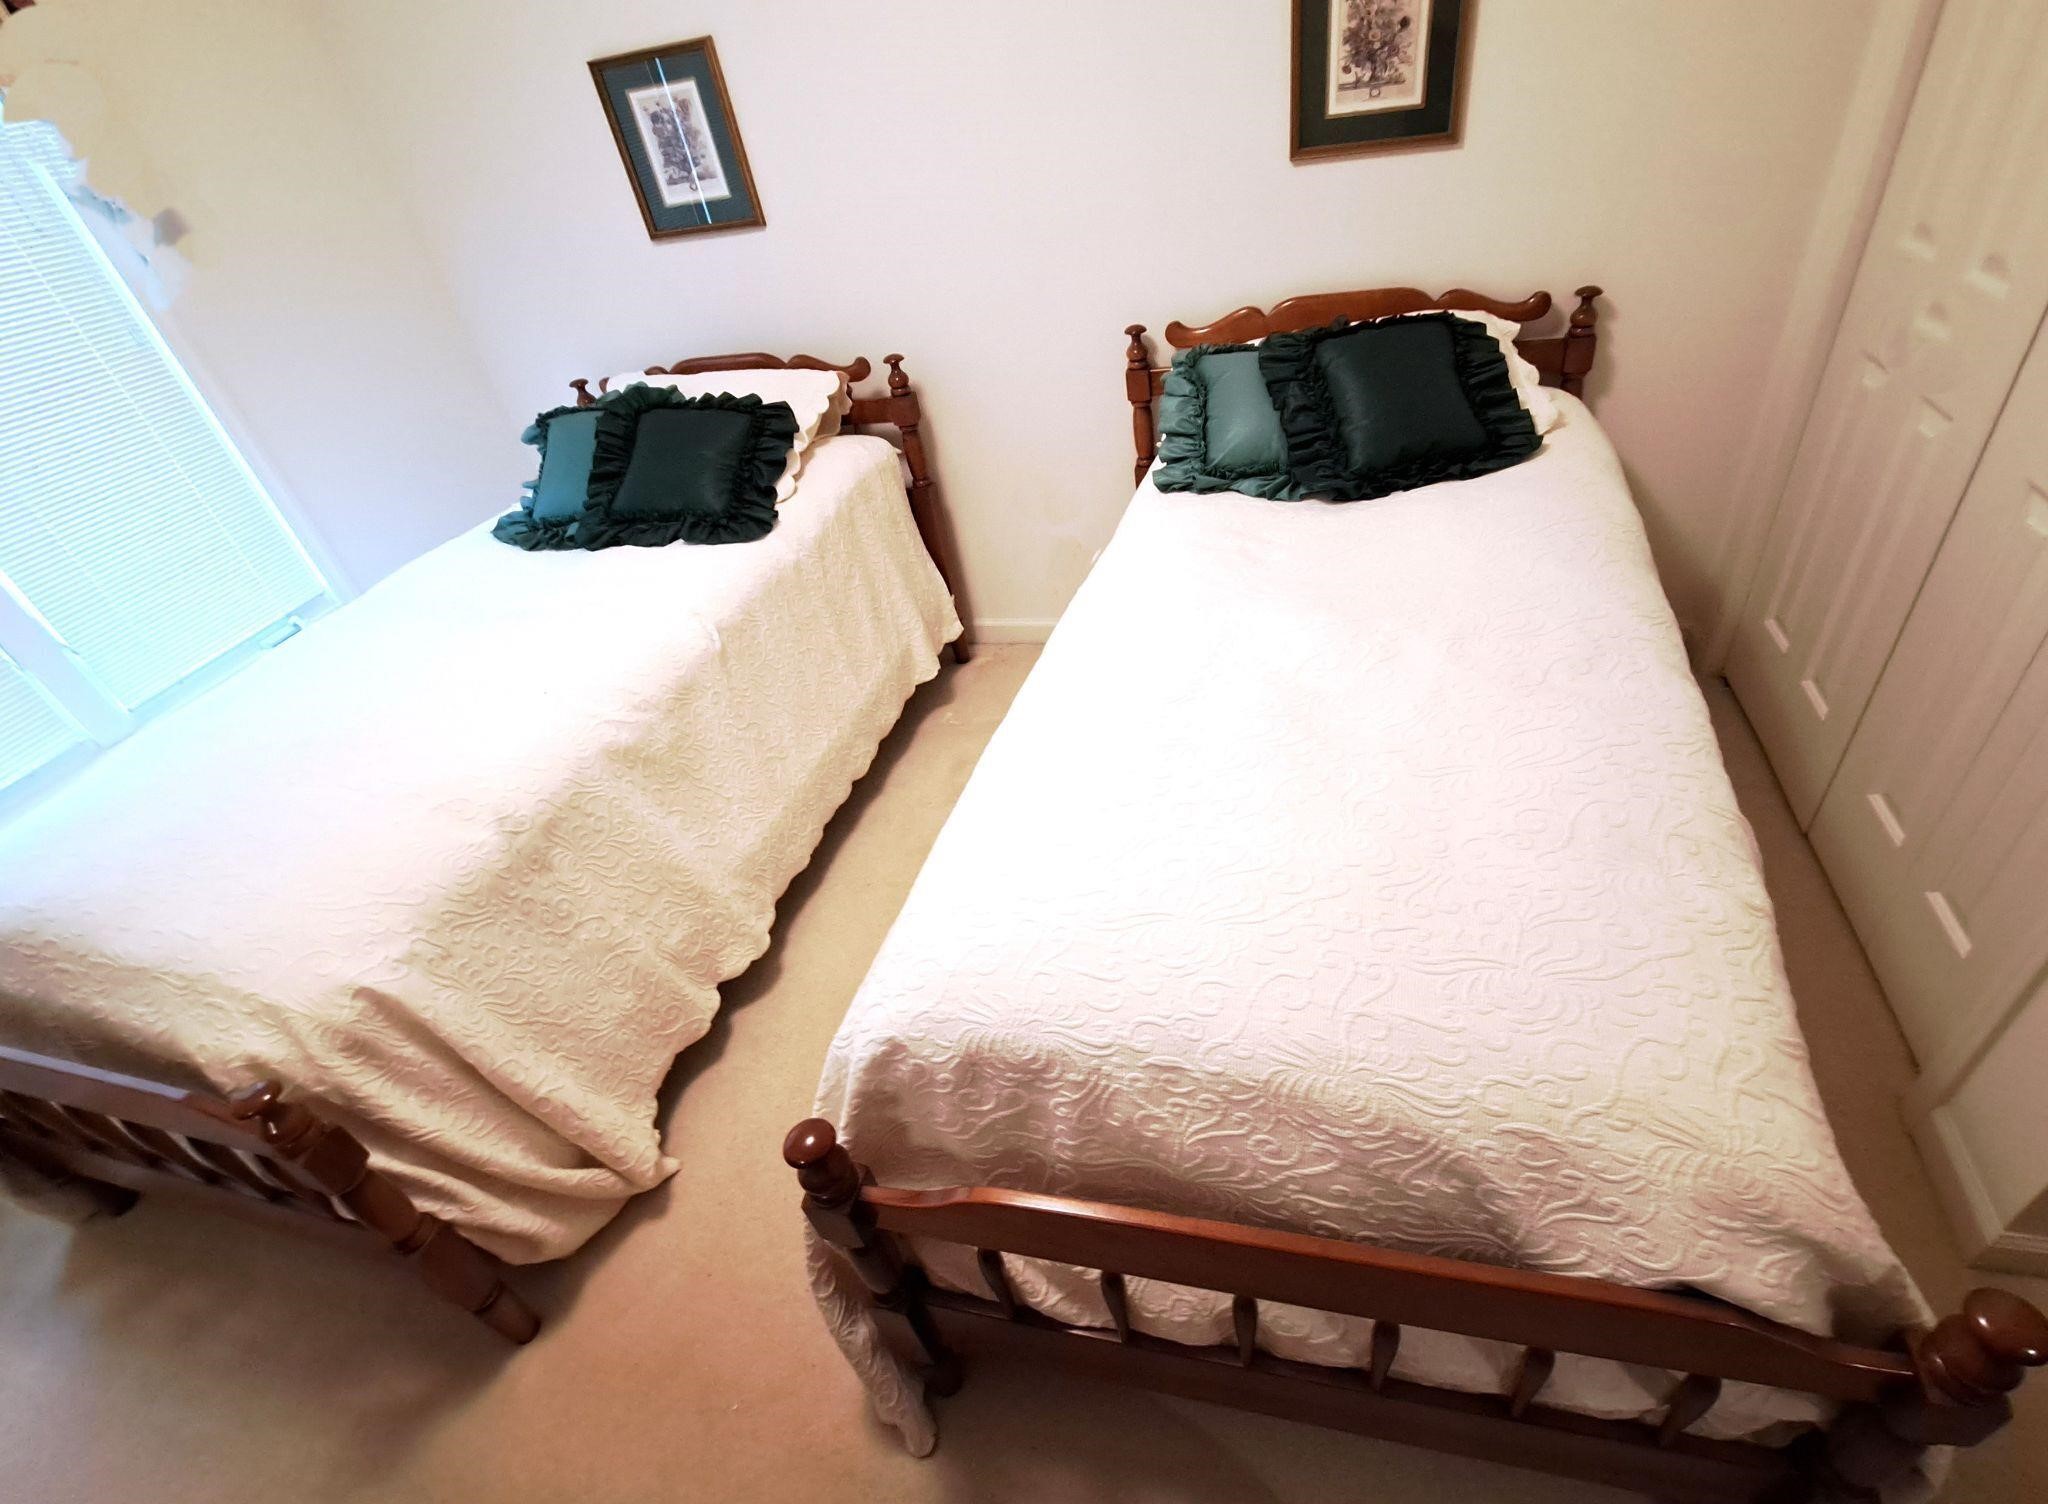 PAIR OF TWIN BEDS WITH CREAM BEDDING & BEDSPREADS